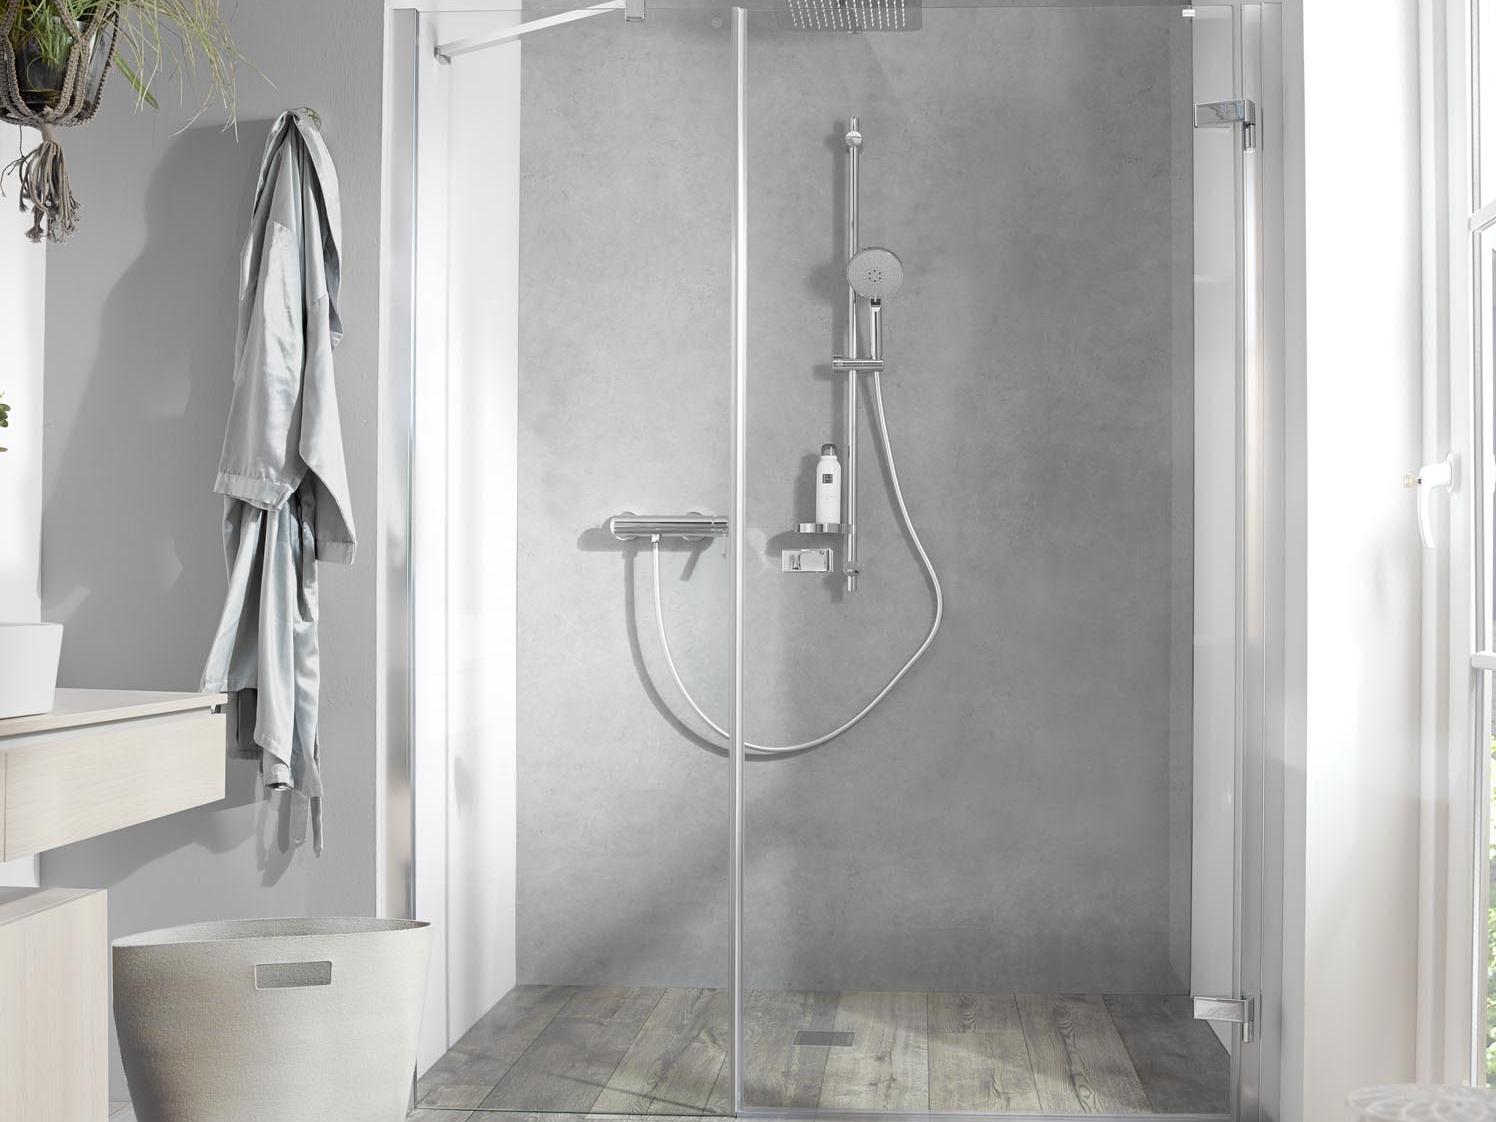 Kermi shower enclosure TUSCA hinged door and fixed panel with wall profile